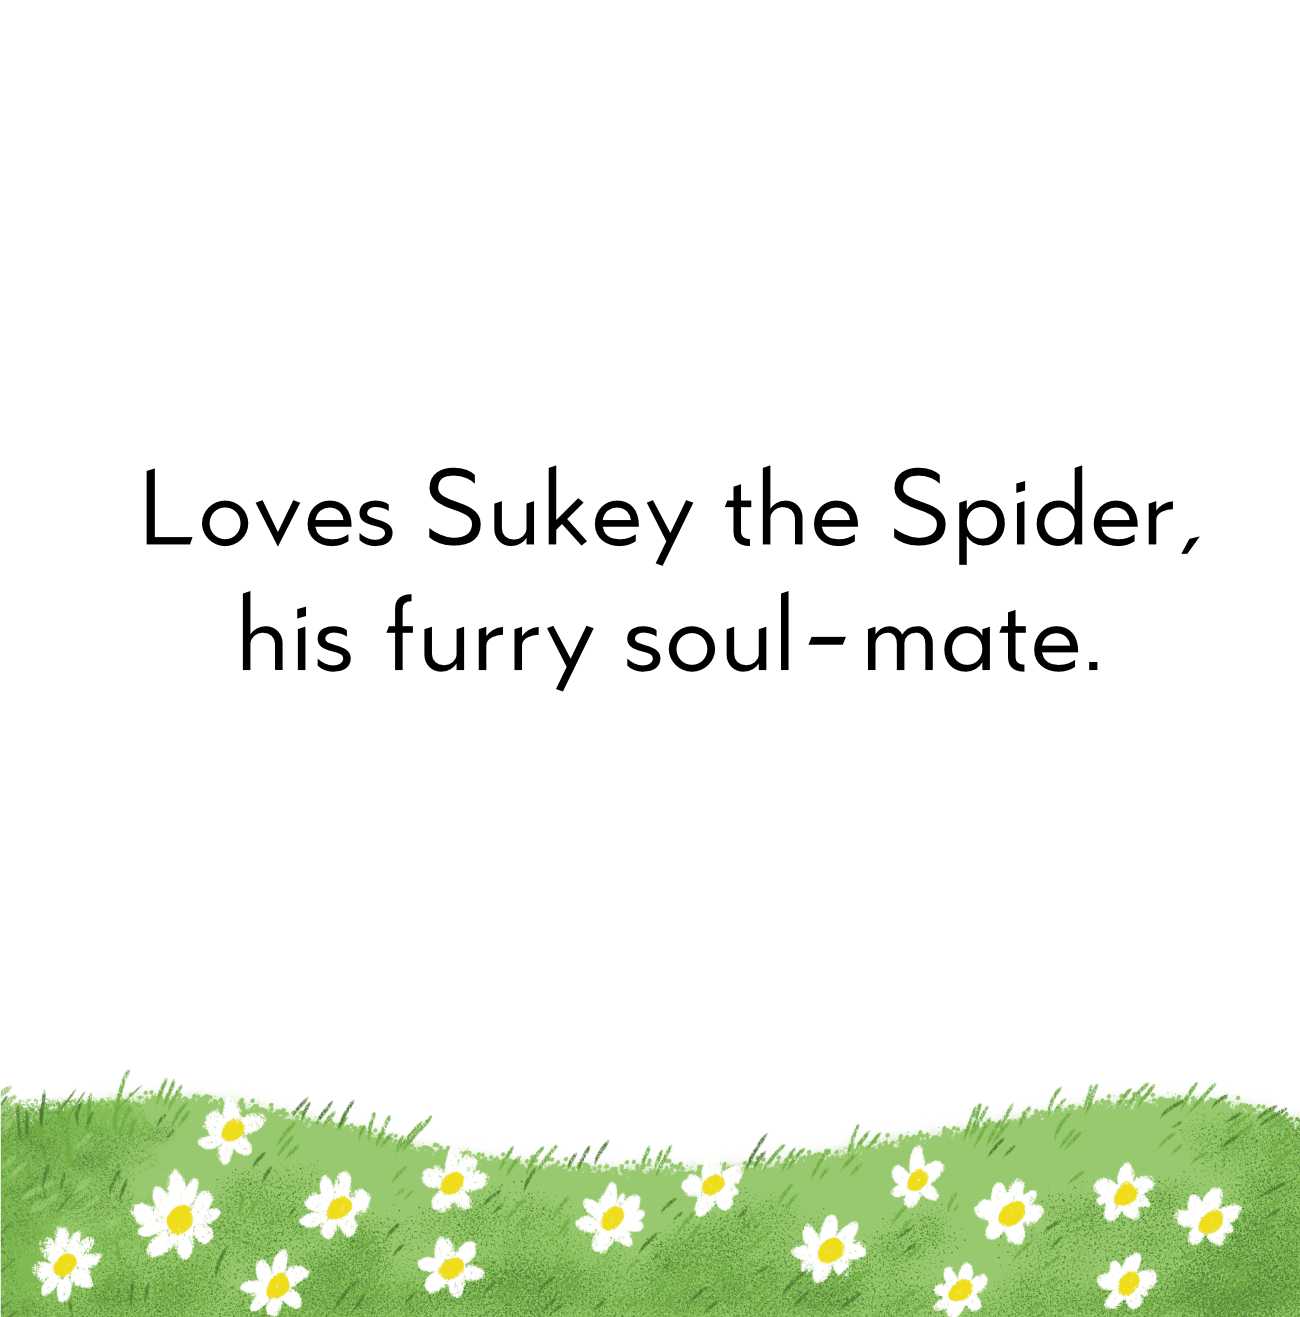 Bedtime Stories Ollie Octopus and Sukey Spider best books short stories for kids page 6